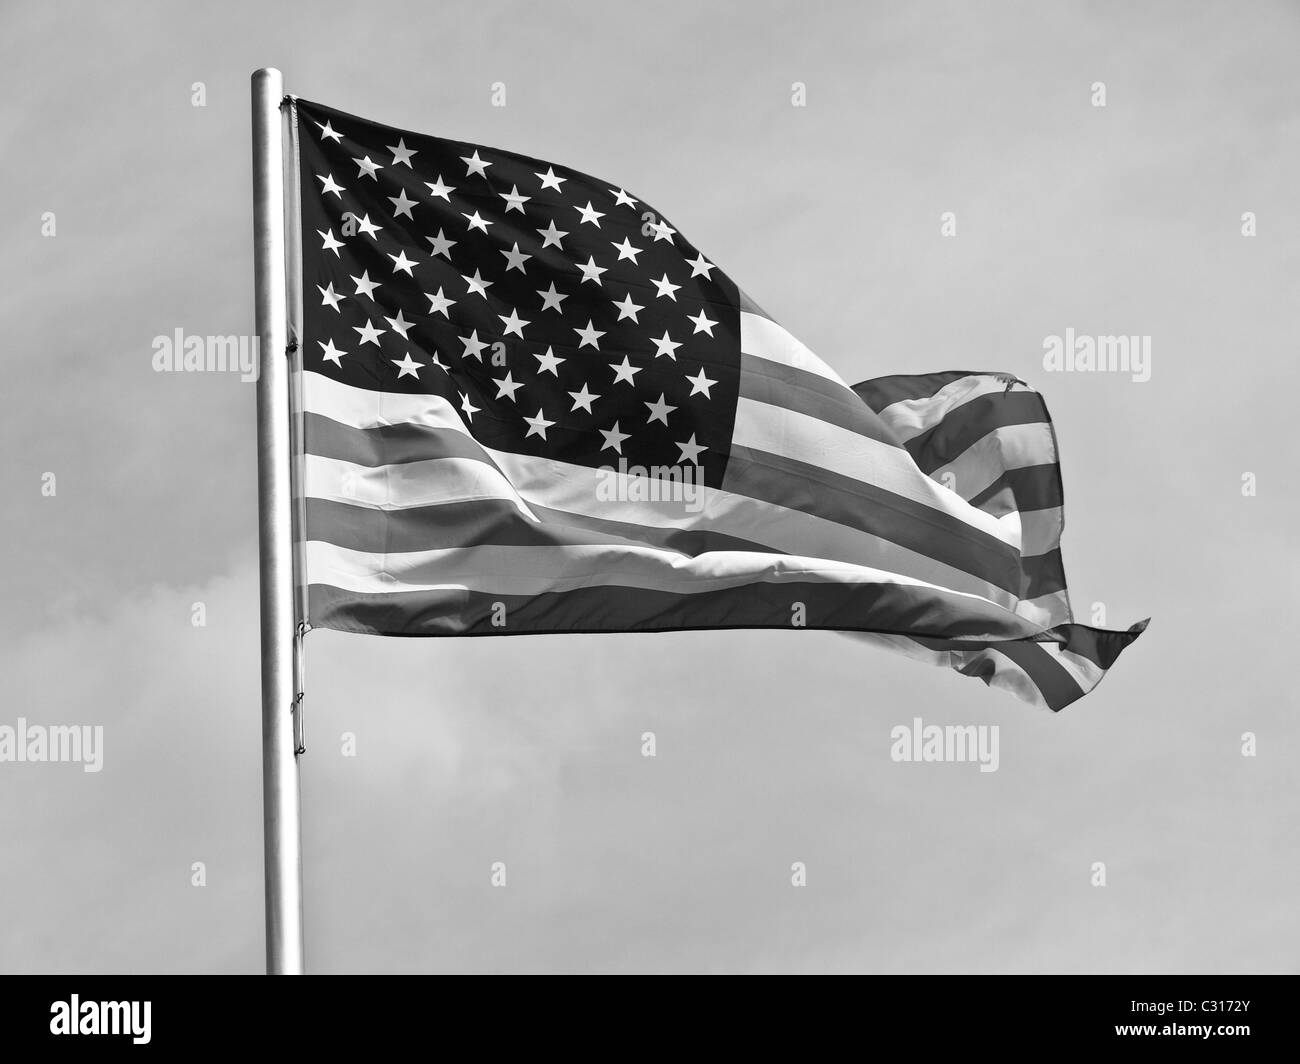 Flag of the USA (United States of America) floating in the wind Stock Photo